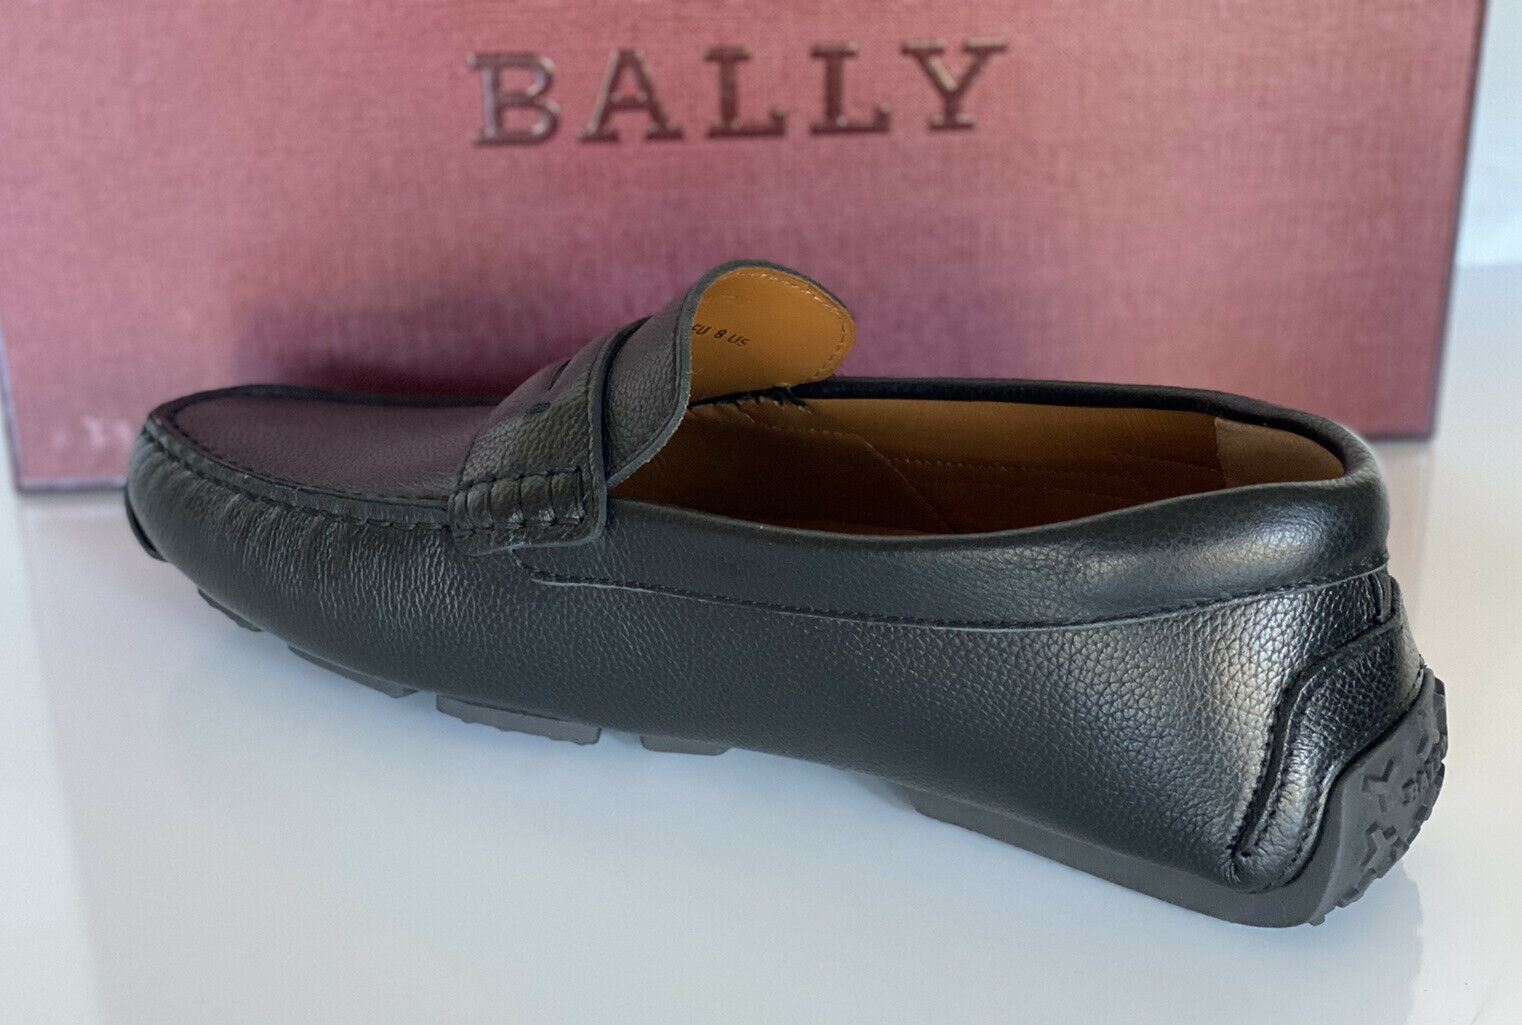 NIB Bally Men's Bovine Grained Leather Driver Loafers Shoes Black 7.5 US 6233869